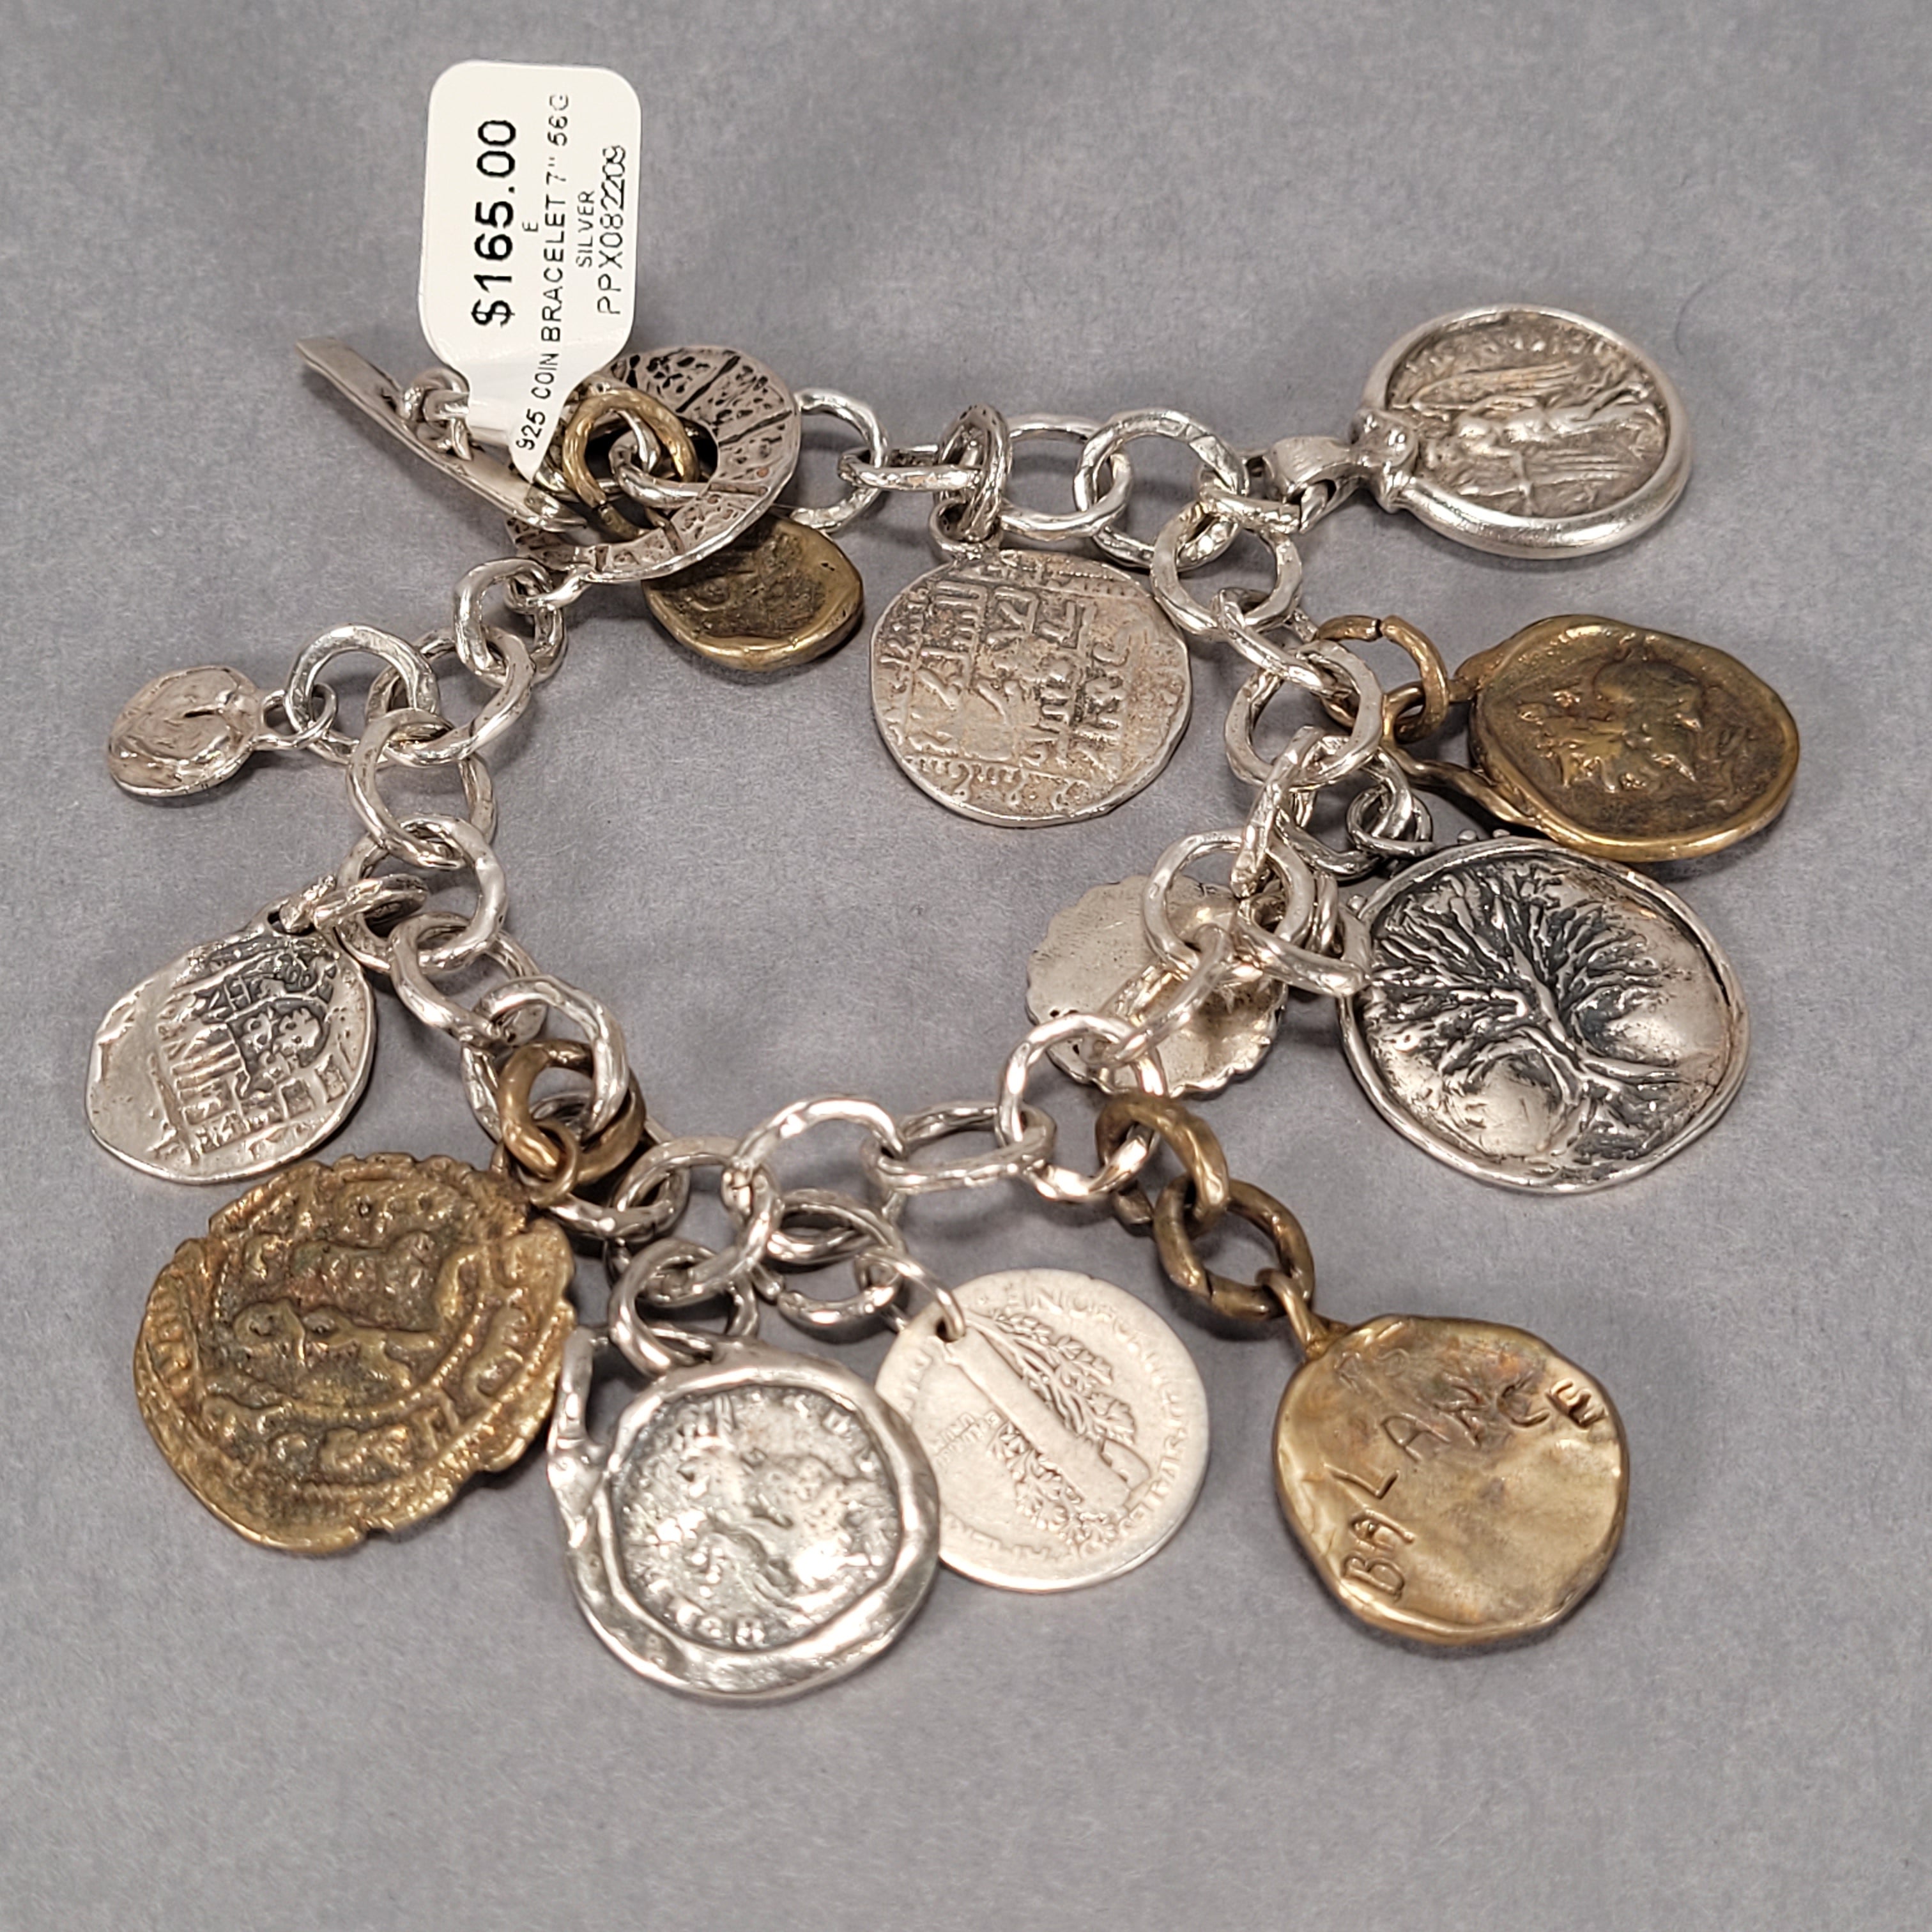 Sold at Auction: Vintage 925 Mexico Jewelry Charm Bracelet